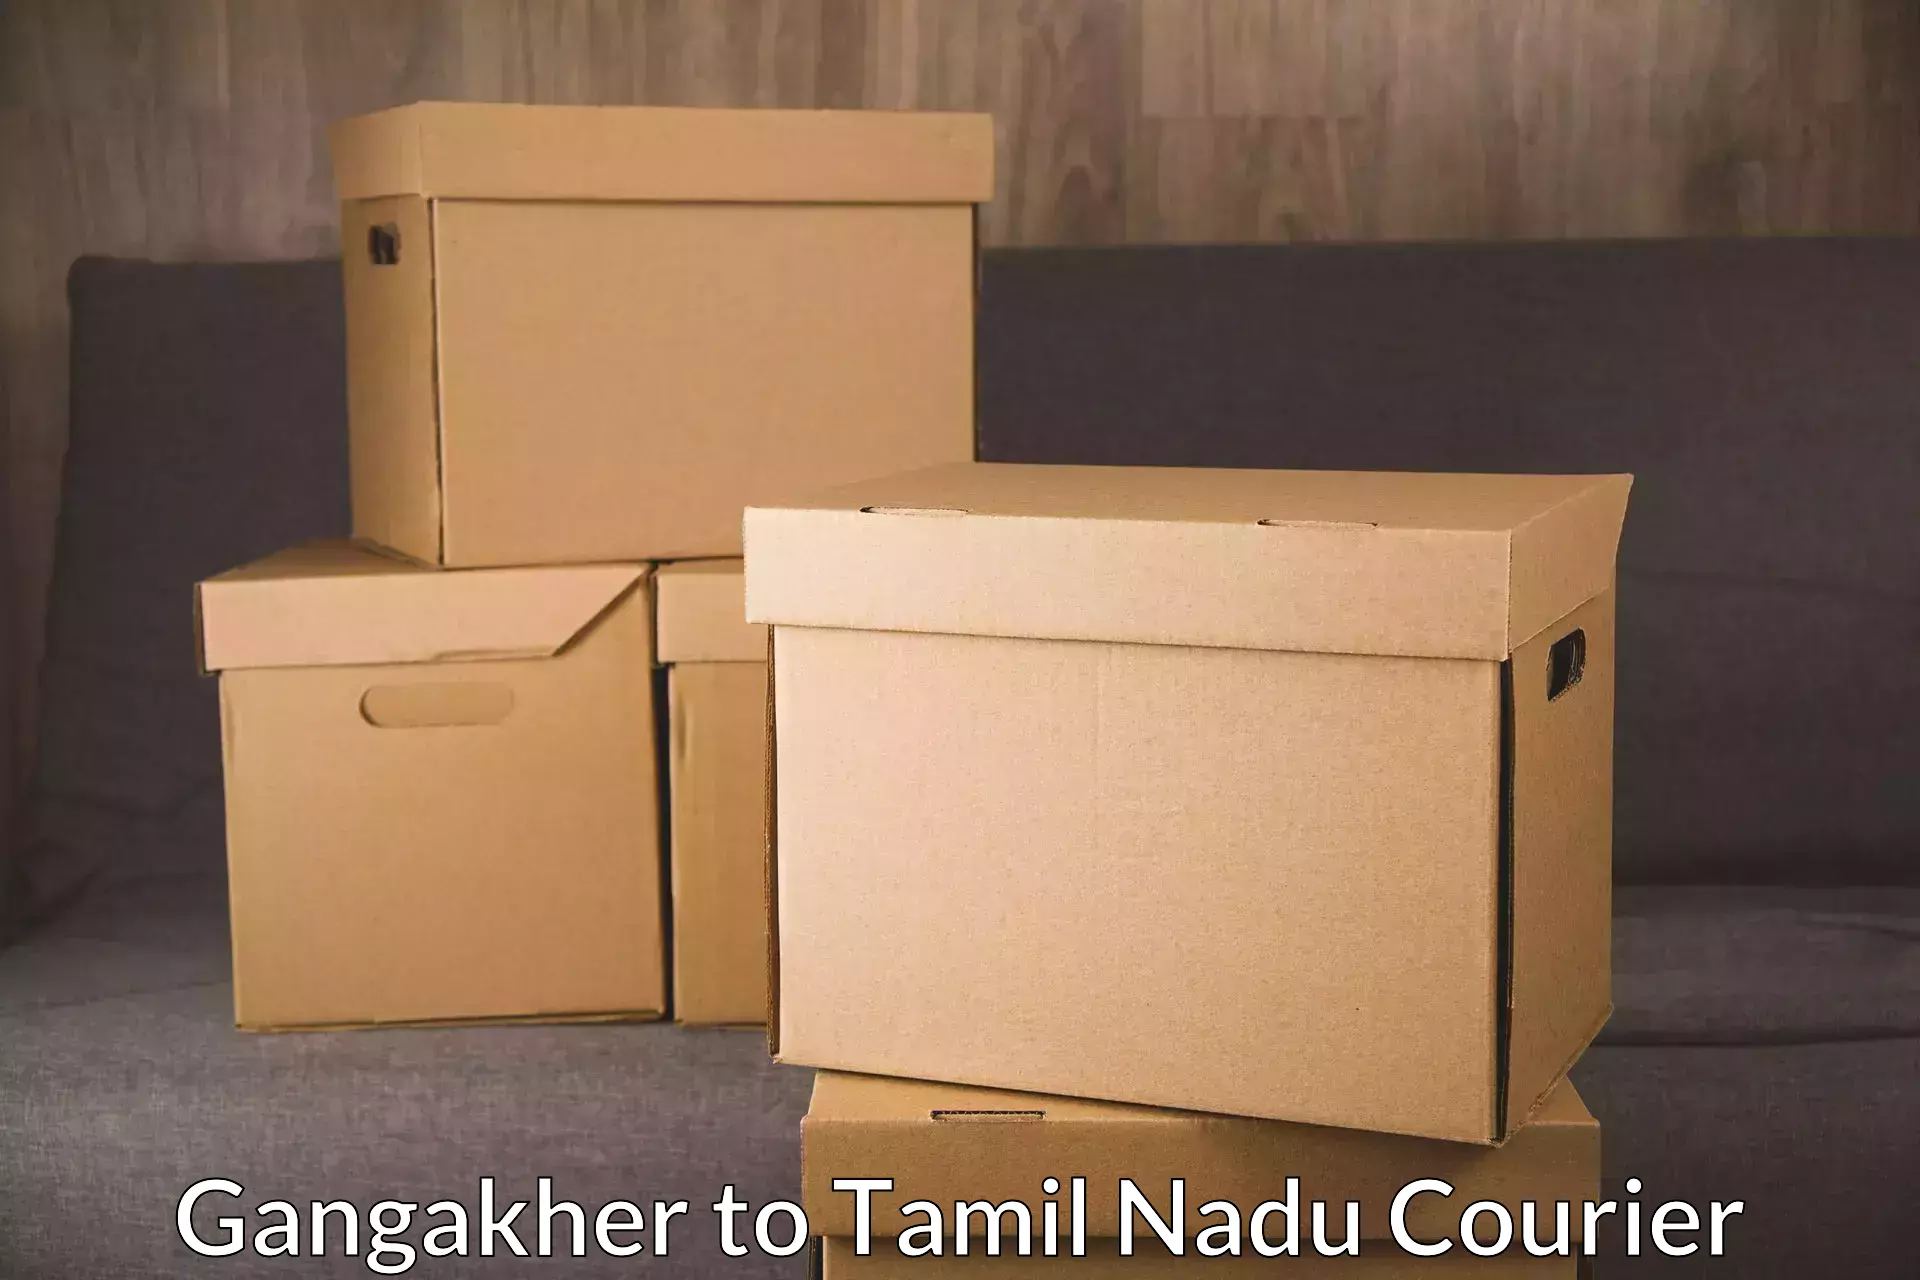 Flexible delivery schedules Gangakher to Gobichettipalayam